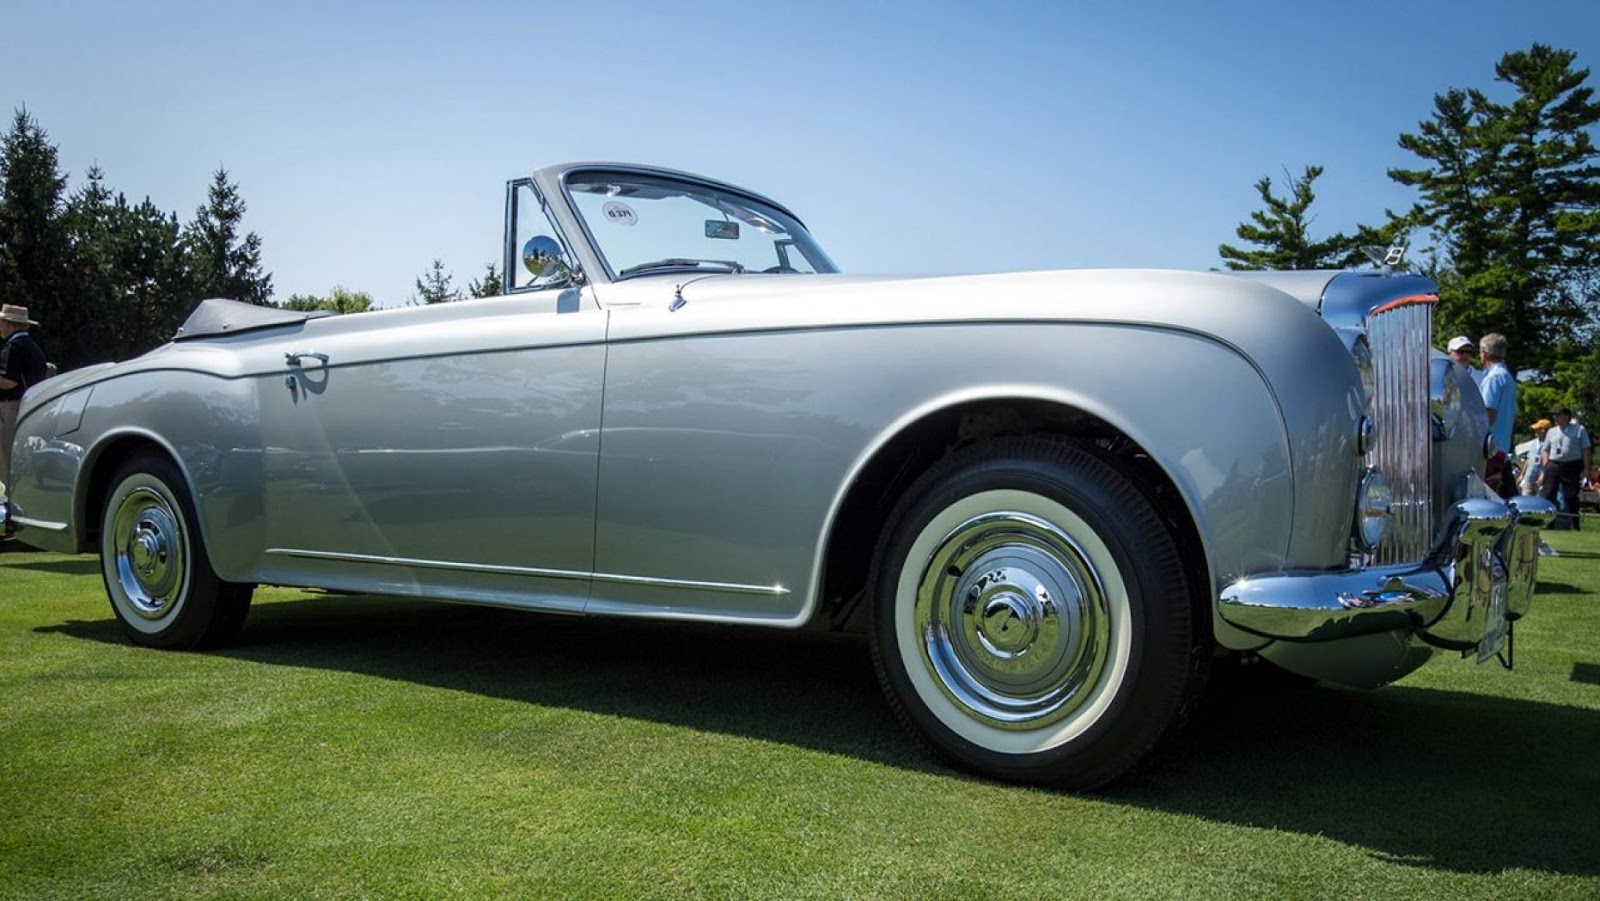 Just A Car Guy a 58 Bentley that Saddam Hussein admired, and confiscated, has made its way to Michigan to get restored photo